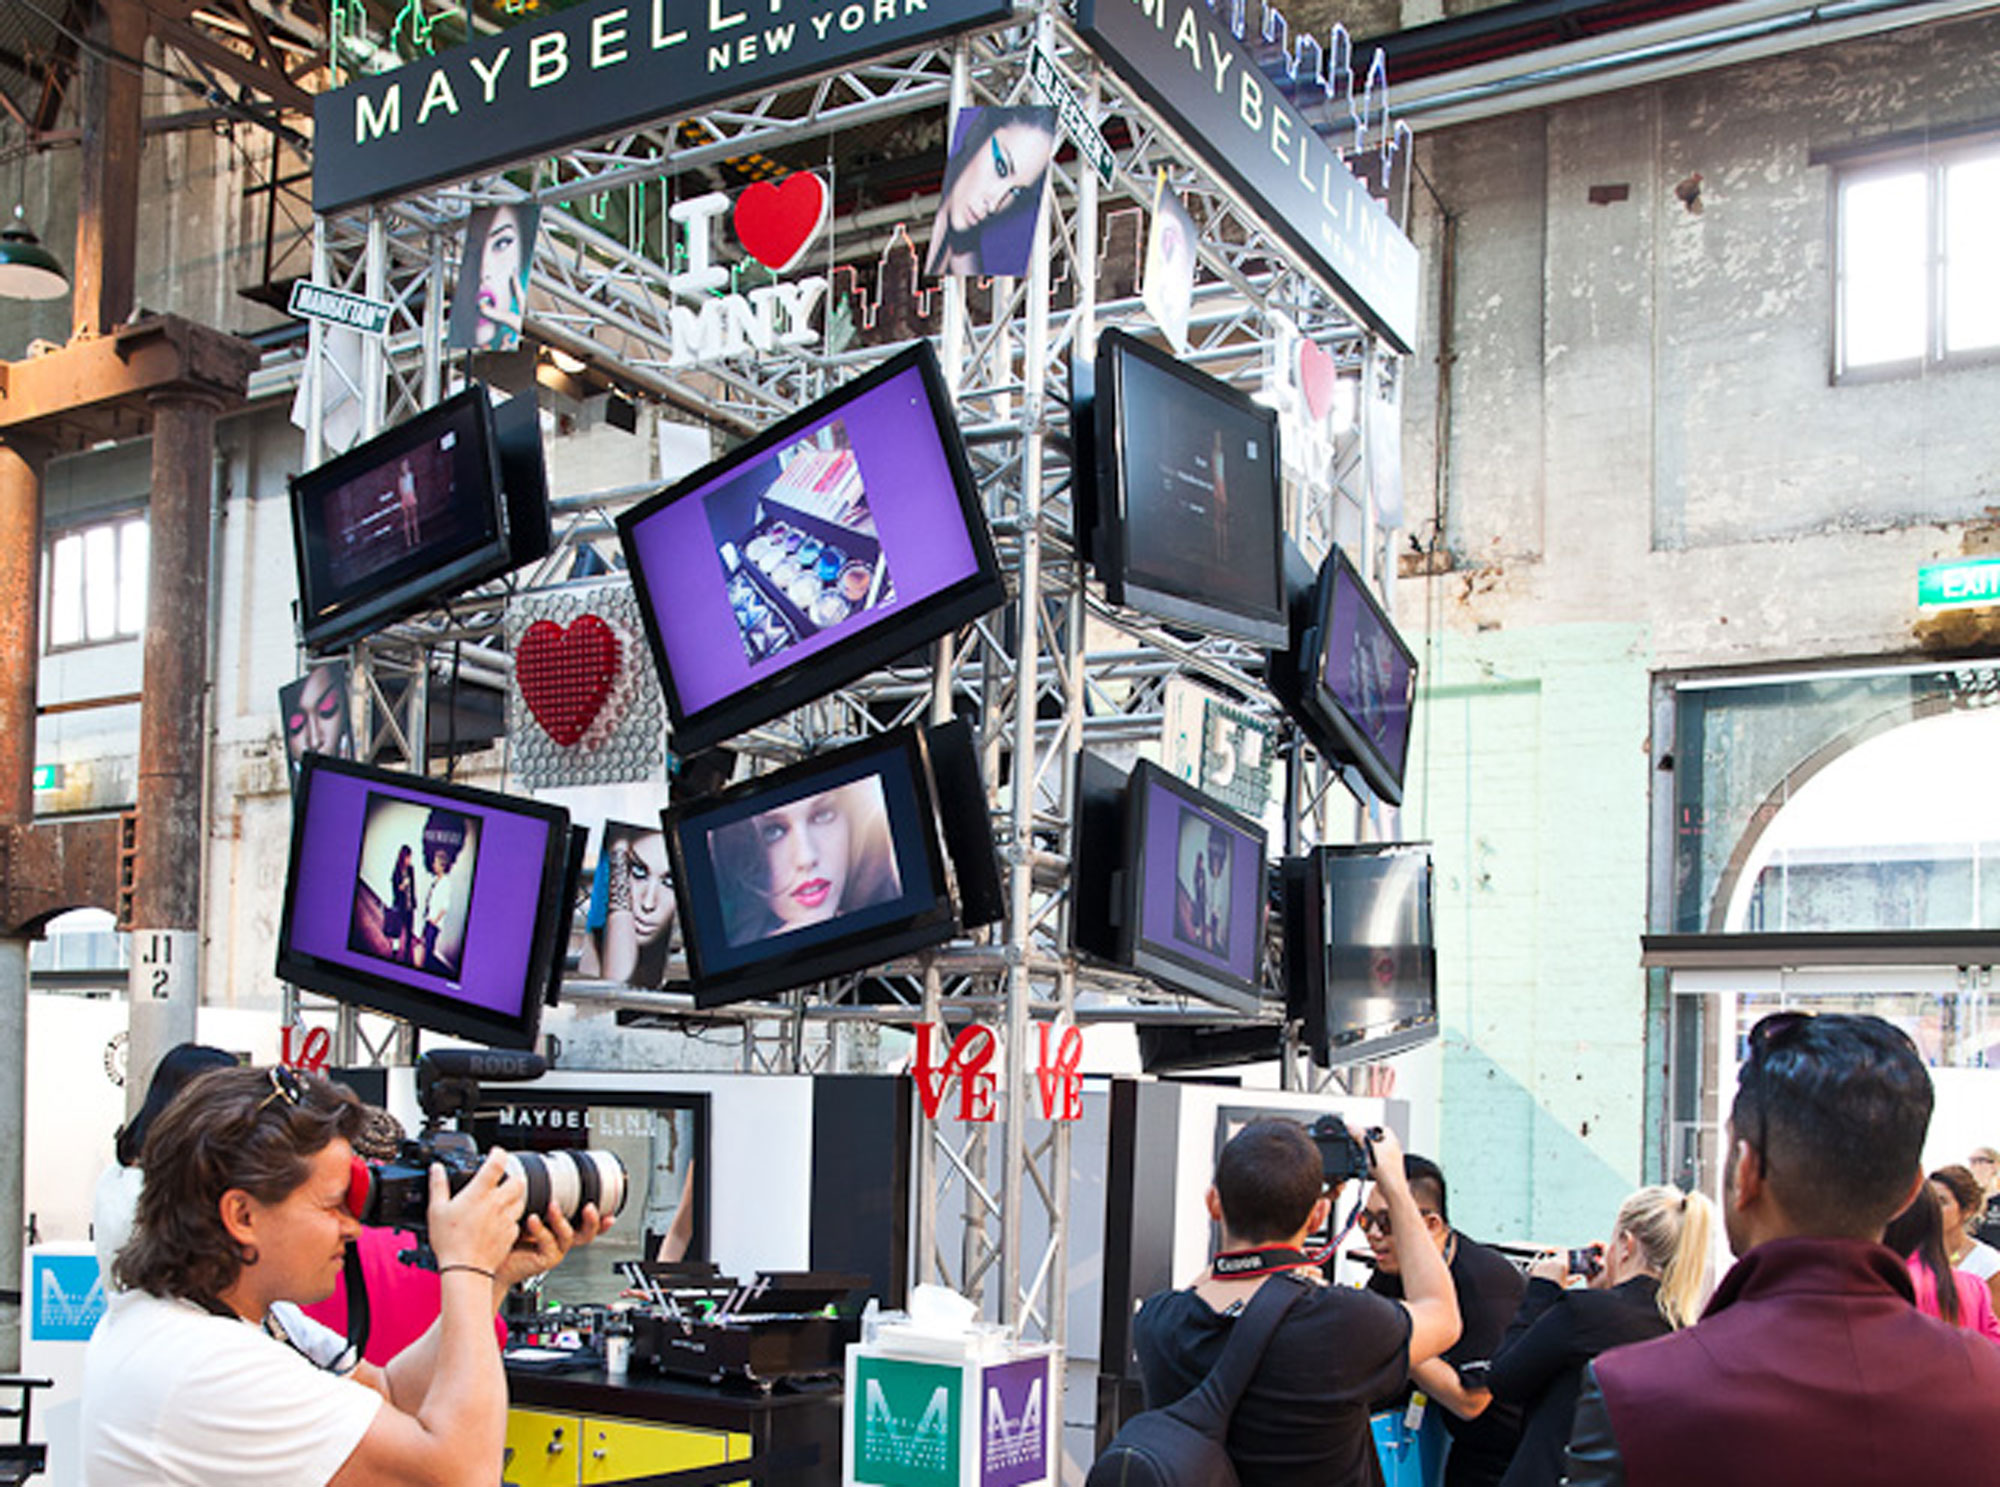 Maybelline Pop up